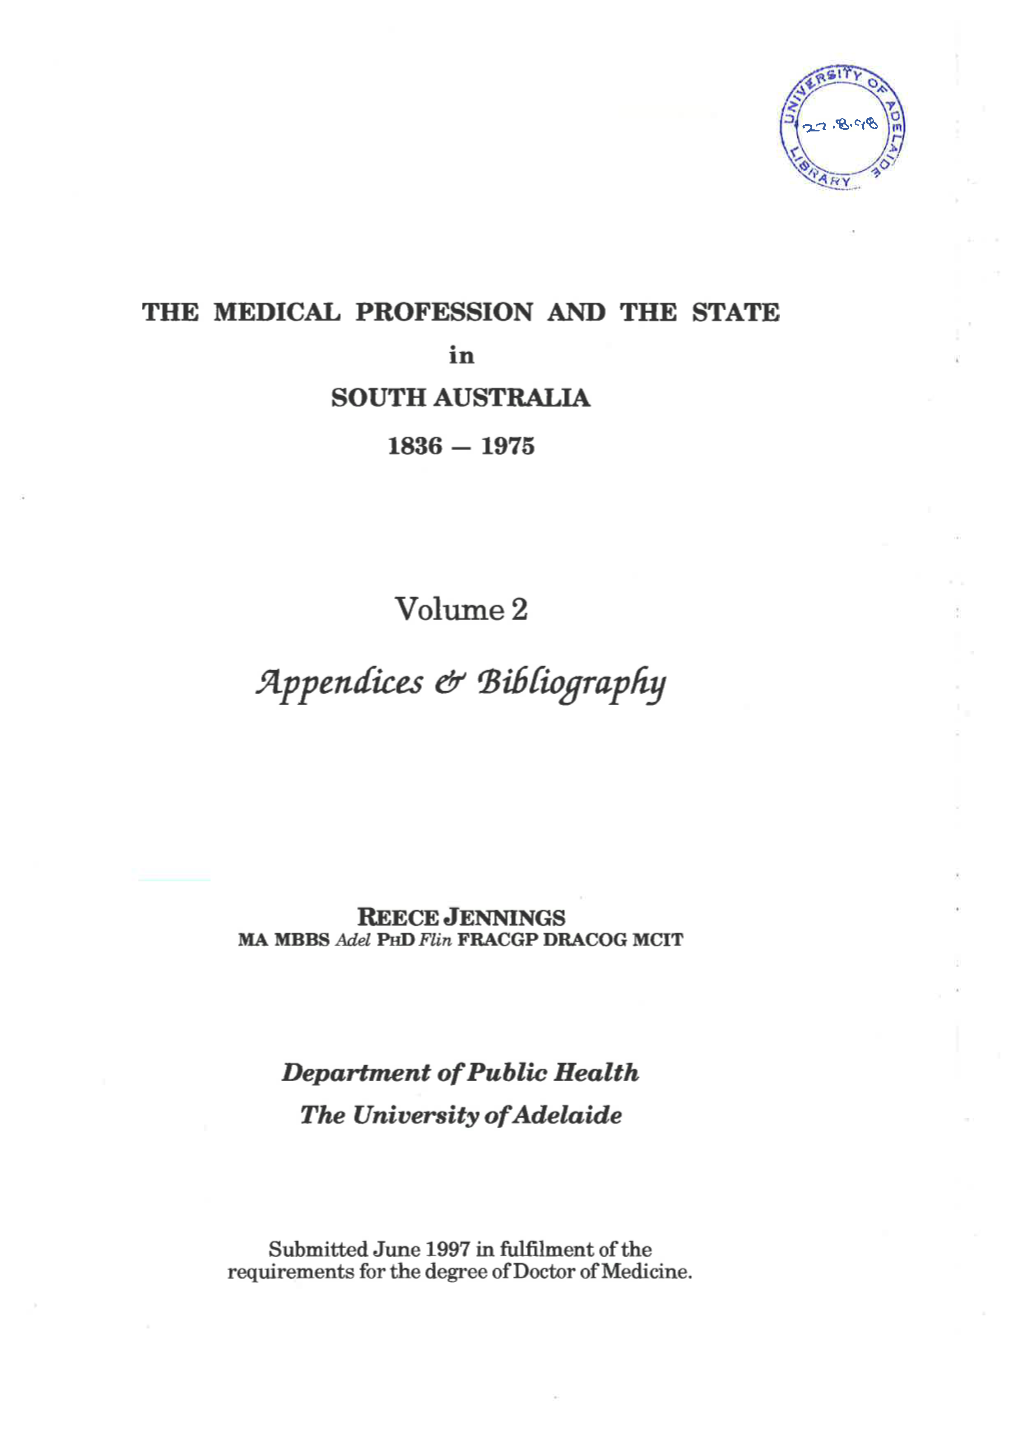 The Medical Profession and the State in South Australia